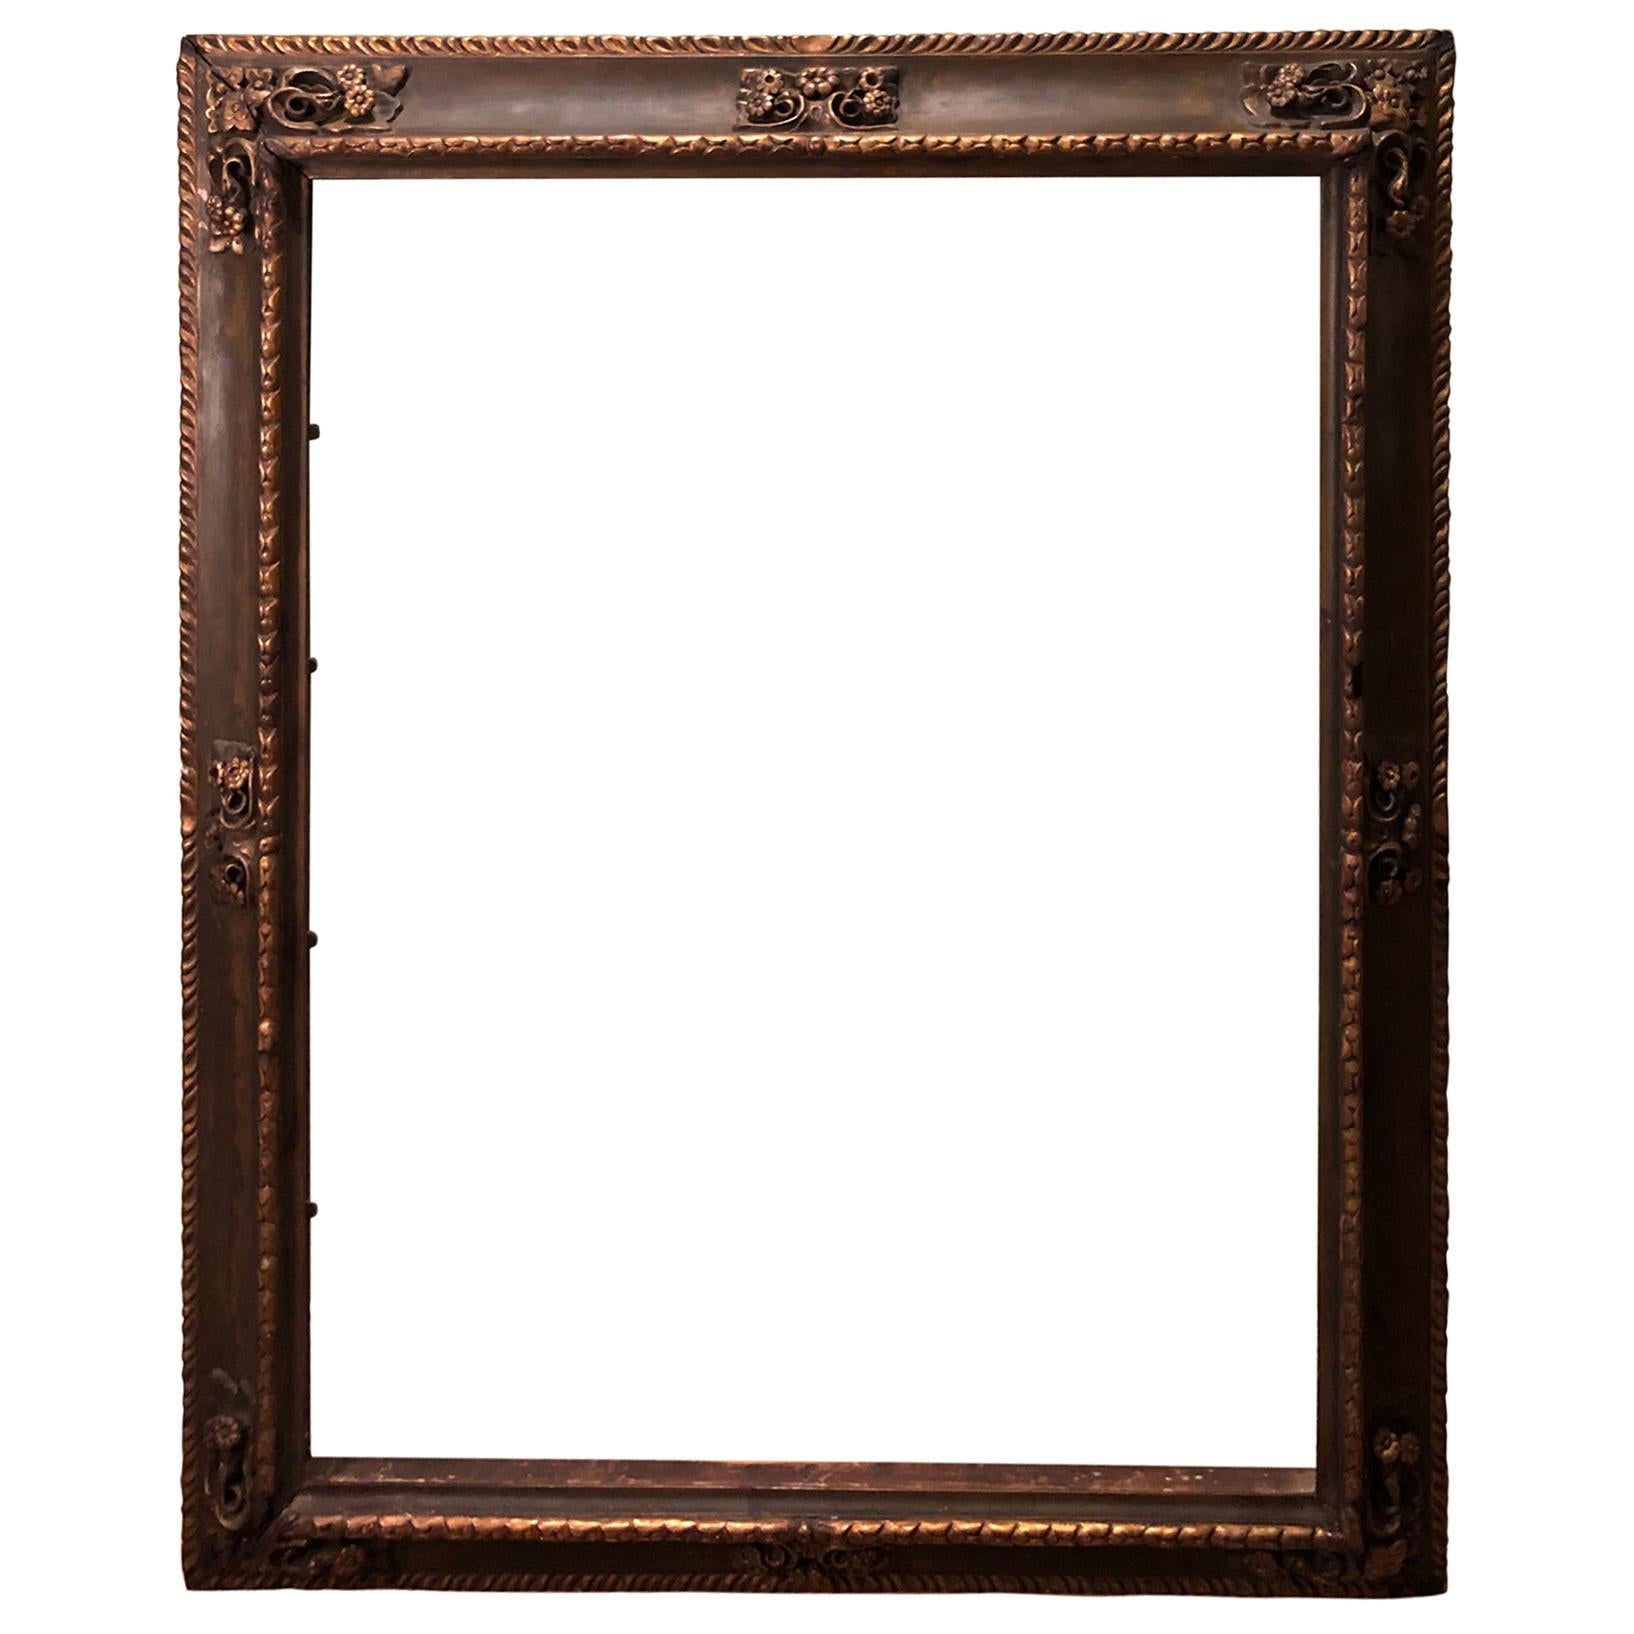 Museum Quality Gilt Gesso Frame with Embossed Designs